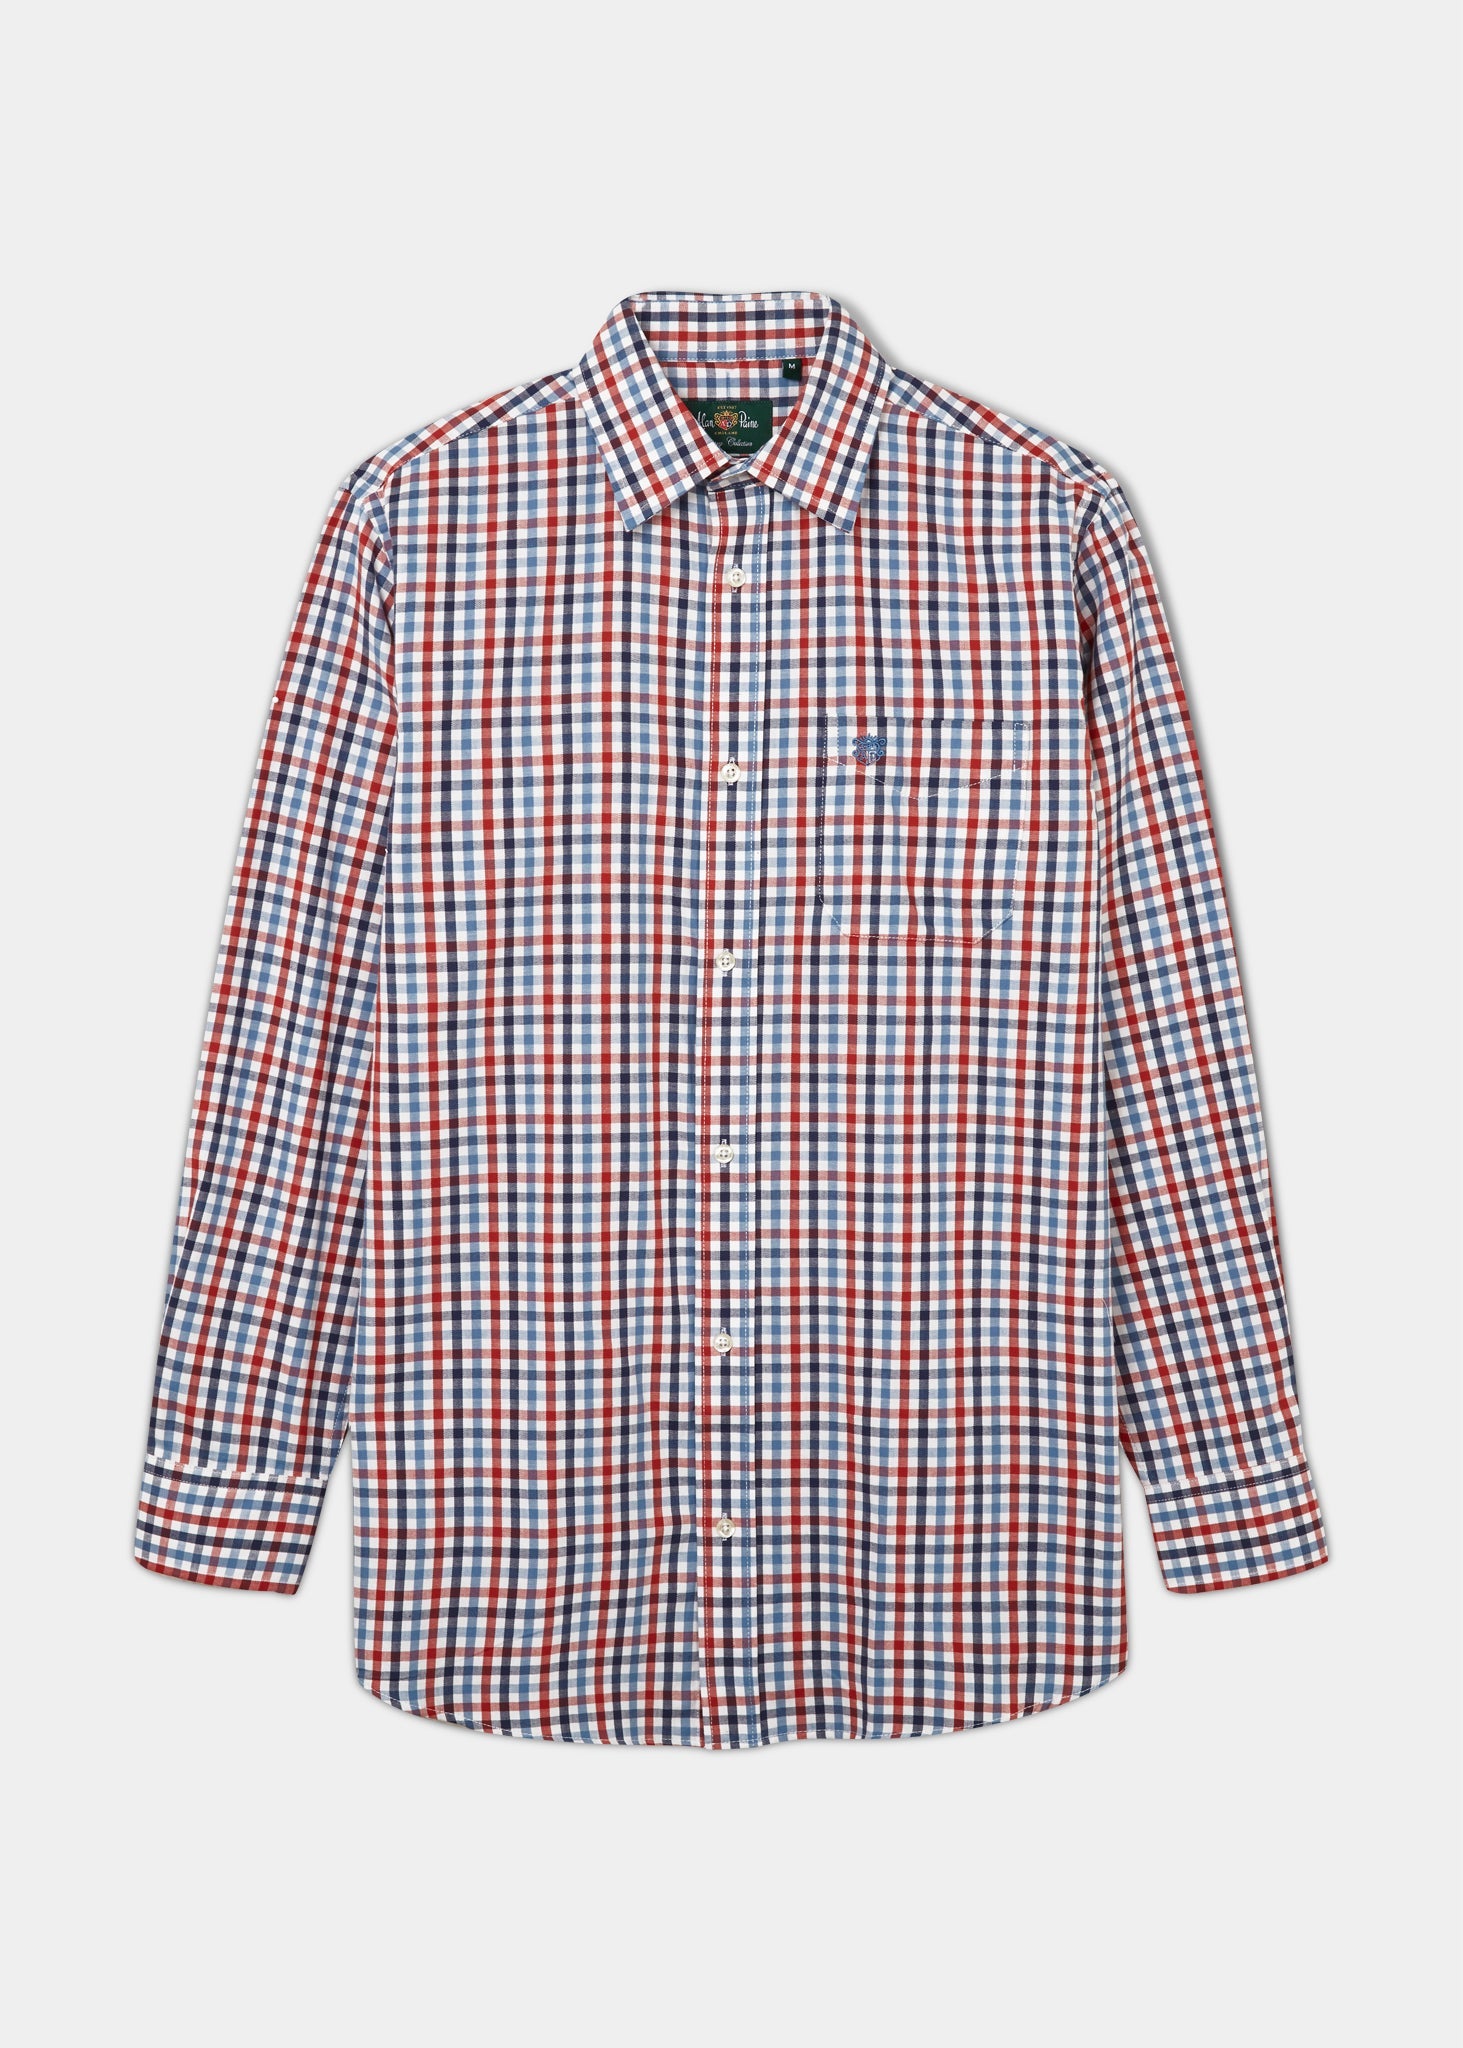 Ilkley Men's Blue and Navy Country Check Shirt - Shooting Fit